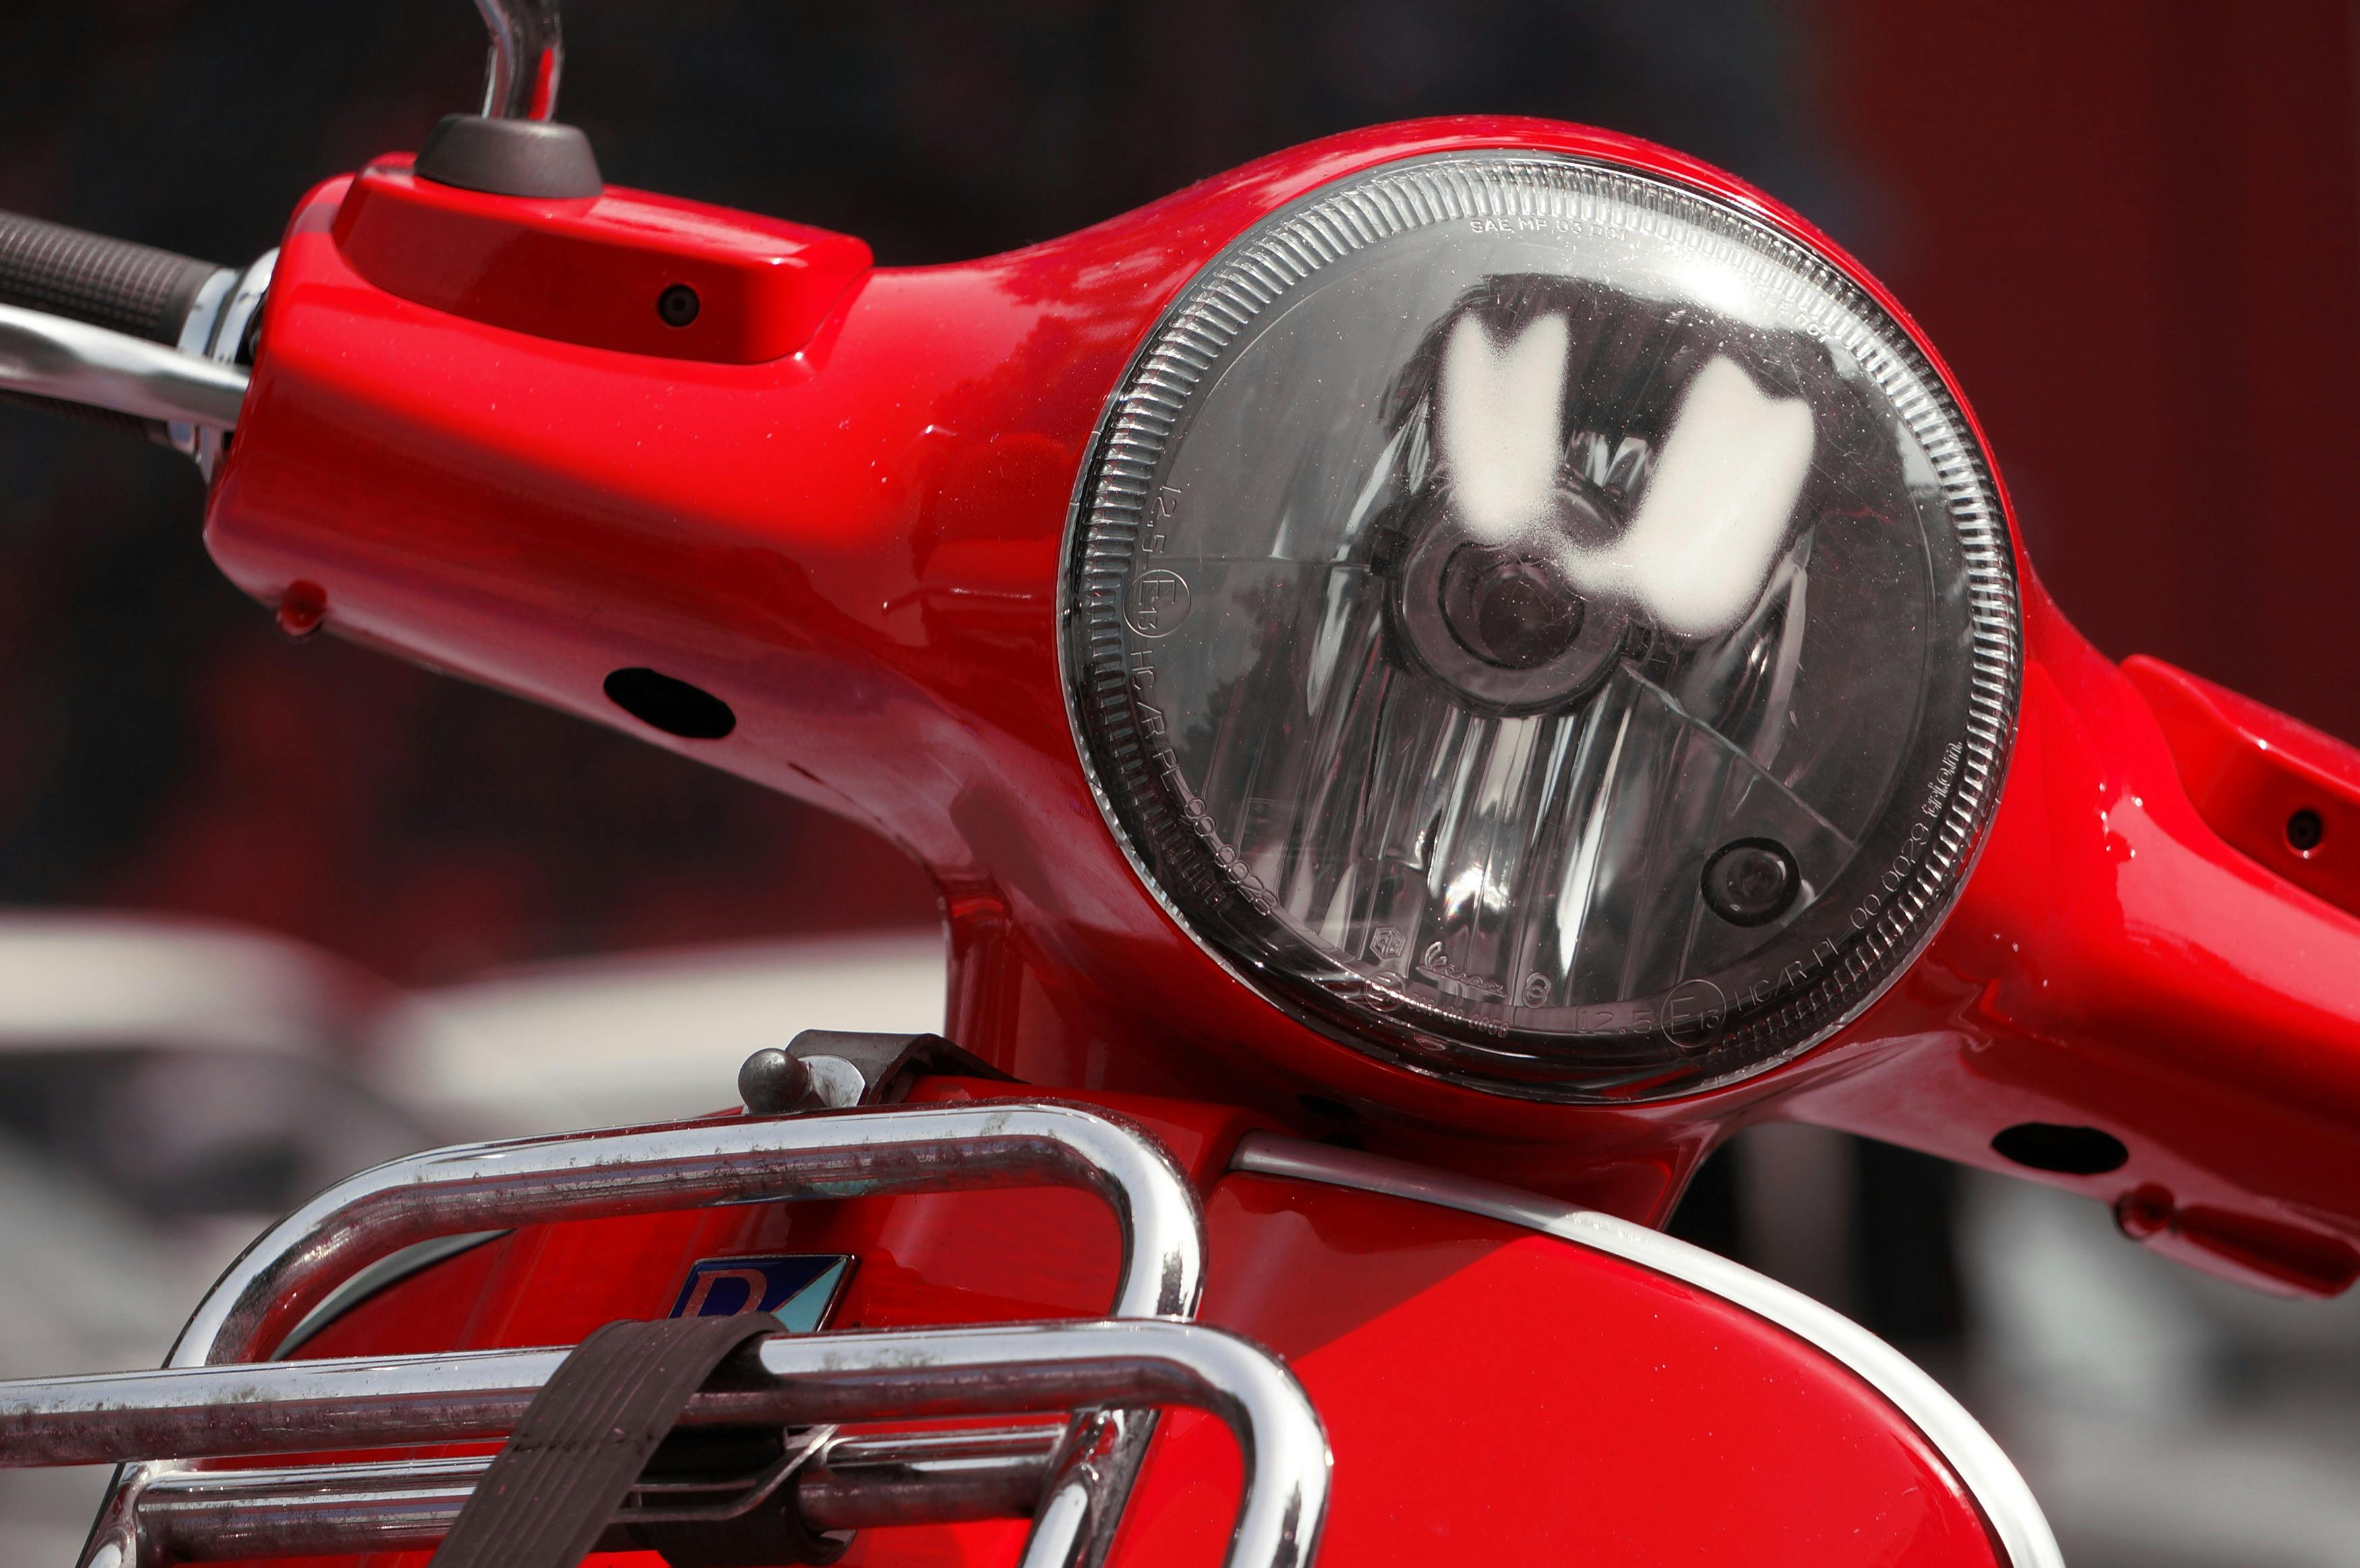 A Red Simson Schwalbe Moped · Free Stock Photo